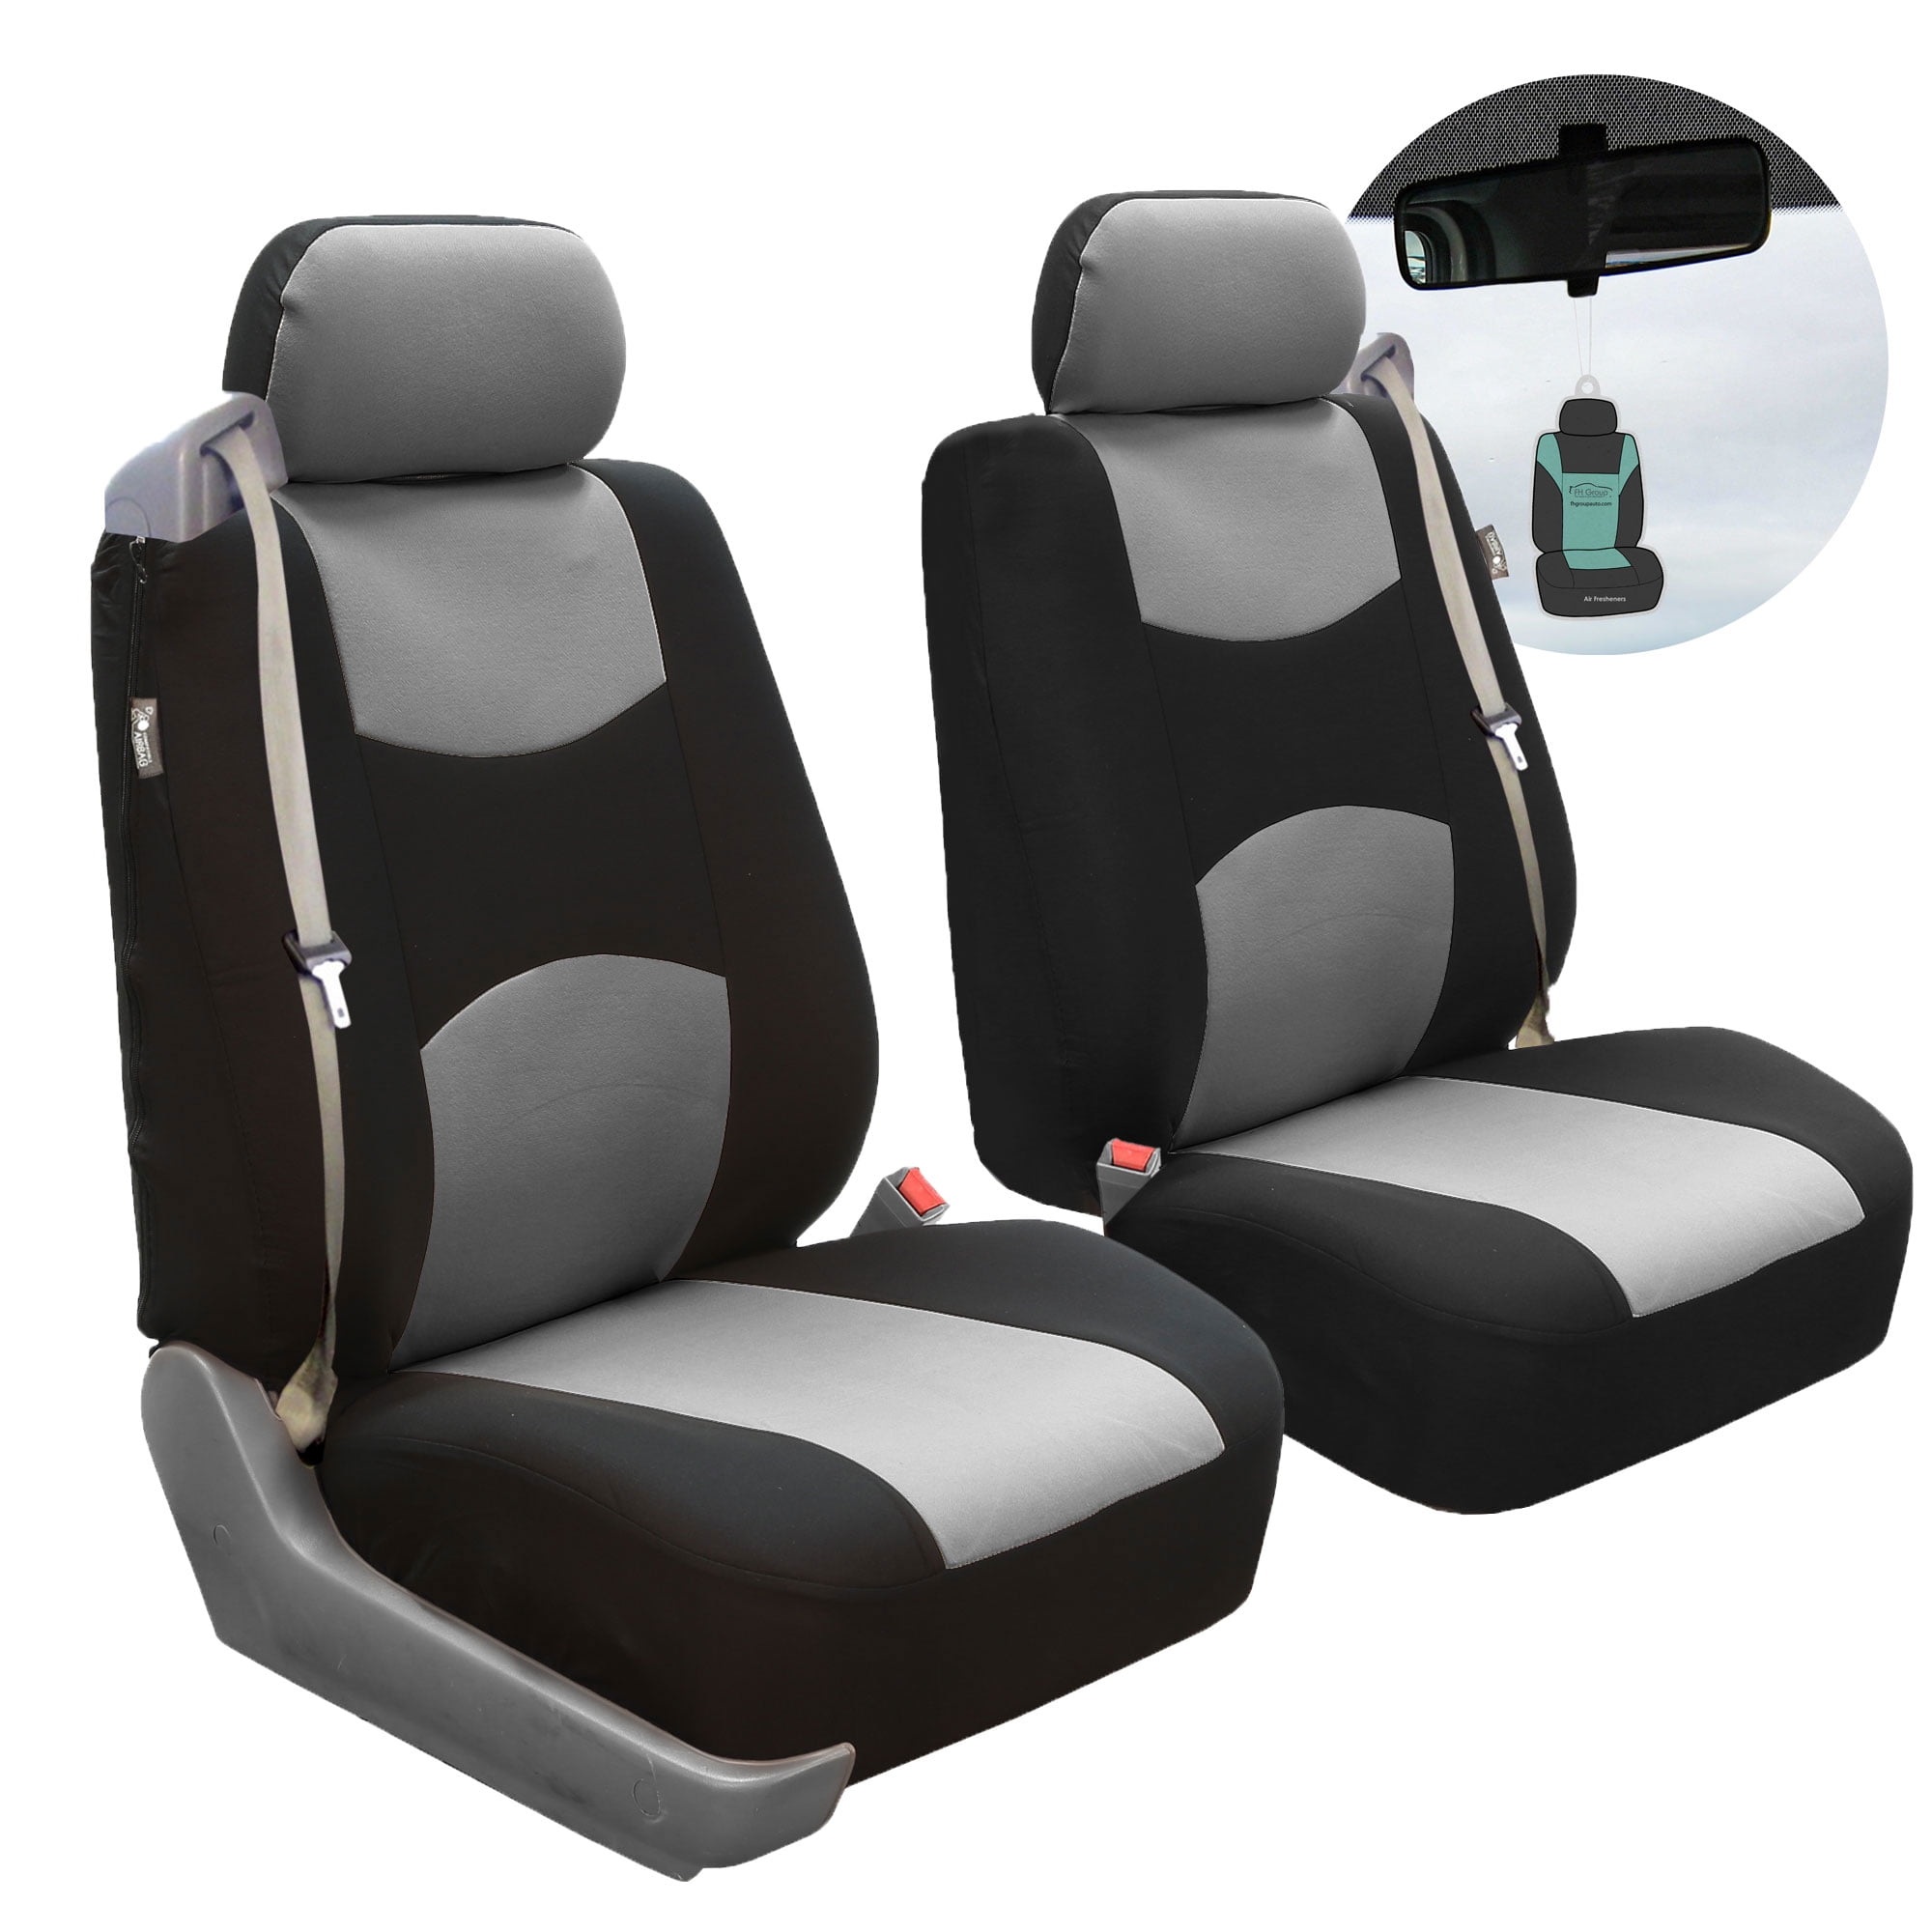 FH Group AFFB351BLACK102 Universal Built-in Seatbelt Front Set Car Seat  Covers with Air Freshener